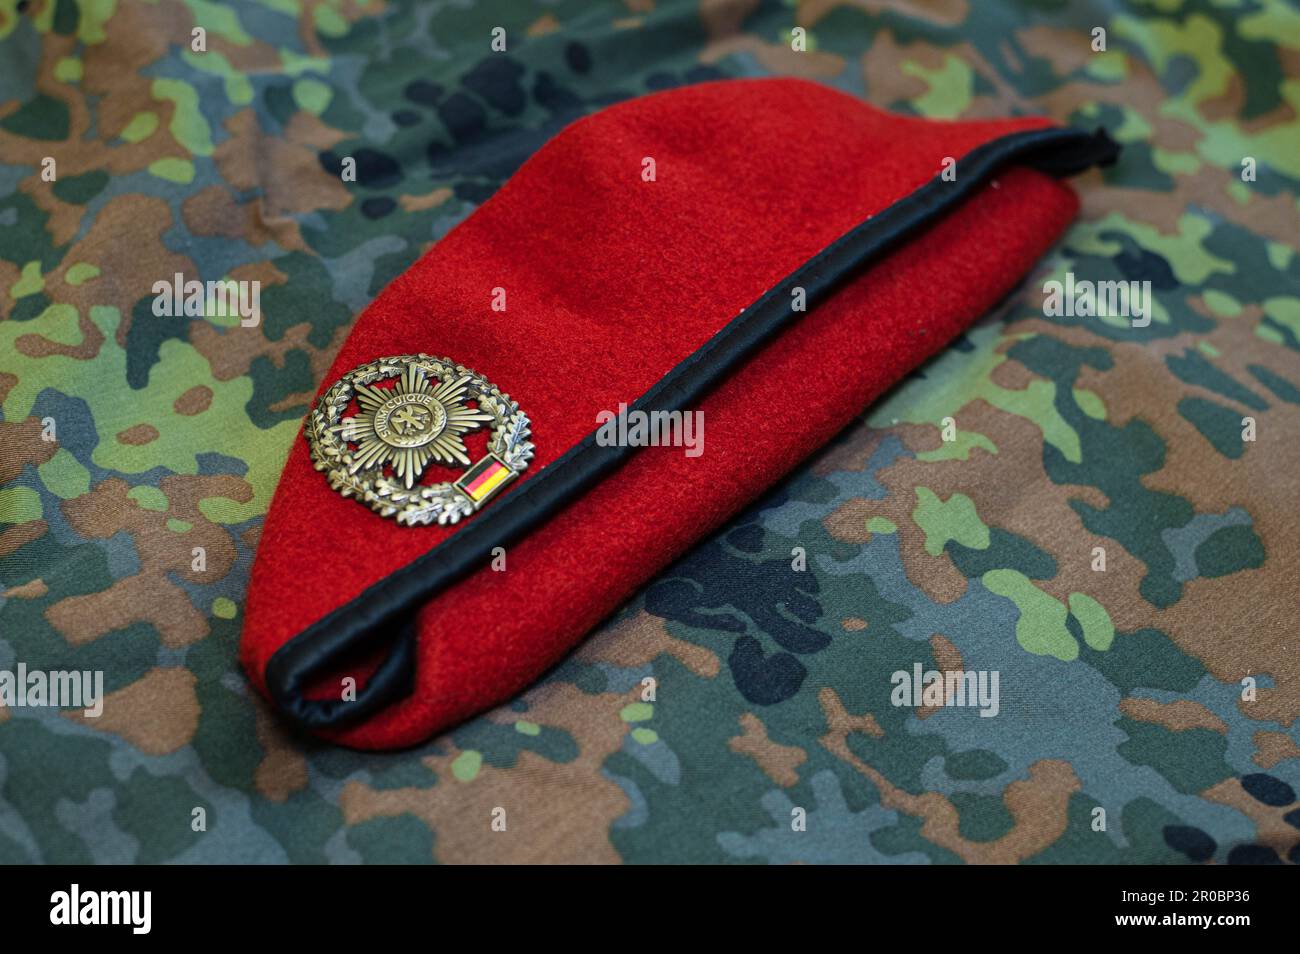 German Barett form military police with badge, German Uniform as background, Badge with Suum cuique Stock Photo